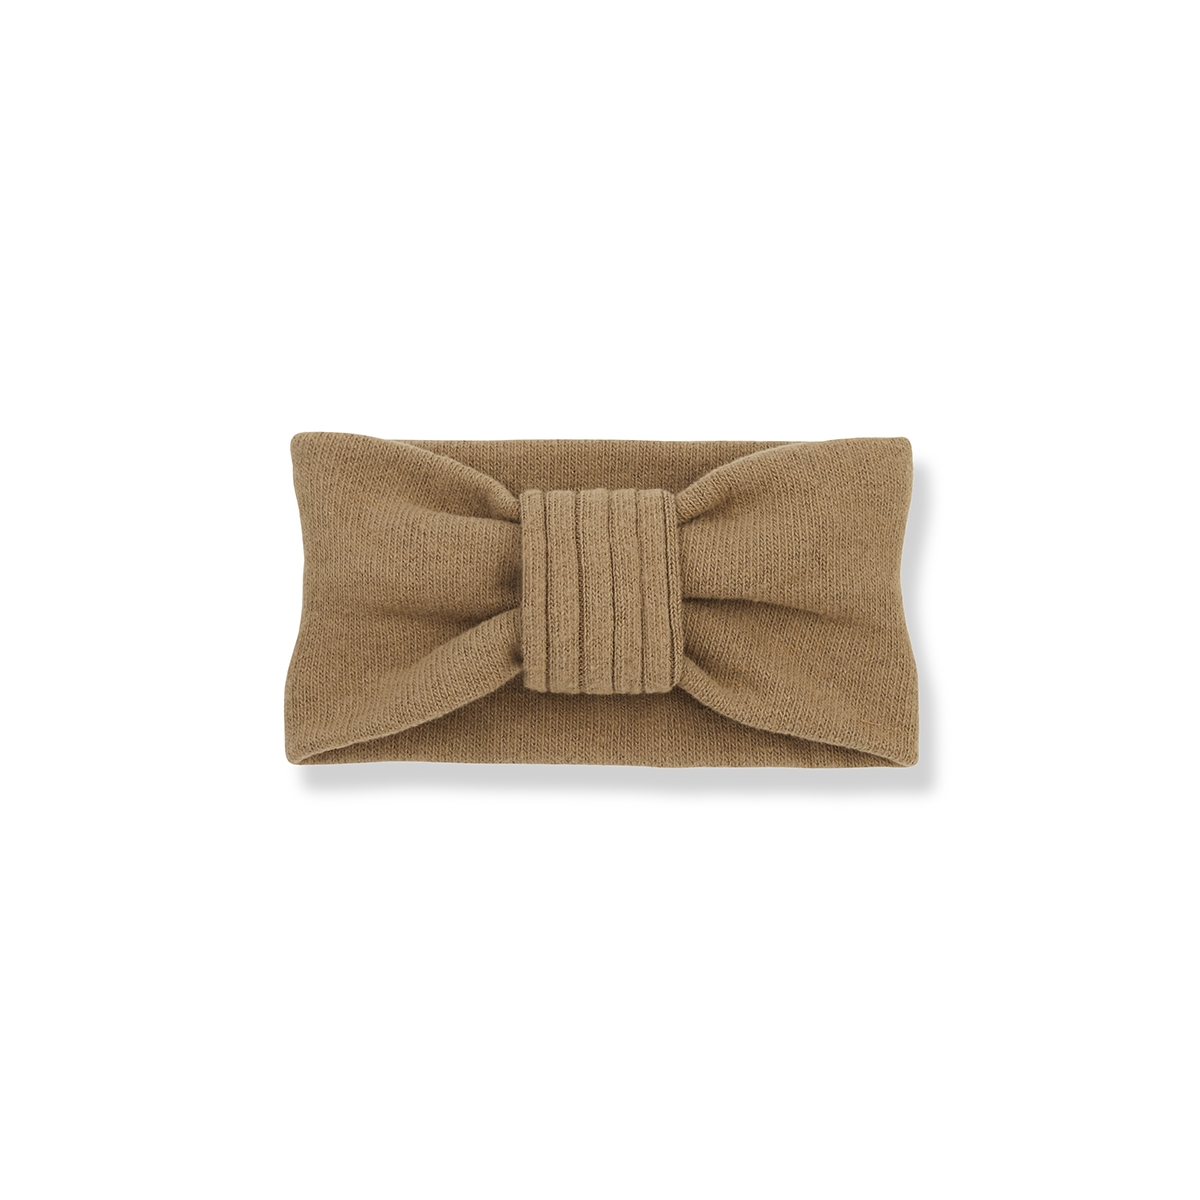 1 + in the family Abril hair band brown AW21-ABRIL-BRANDY 